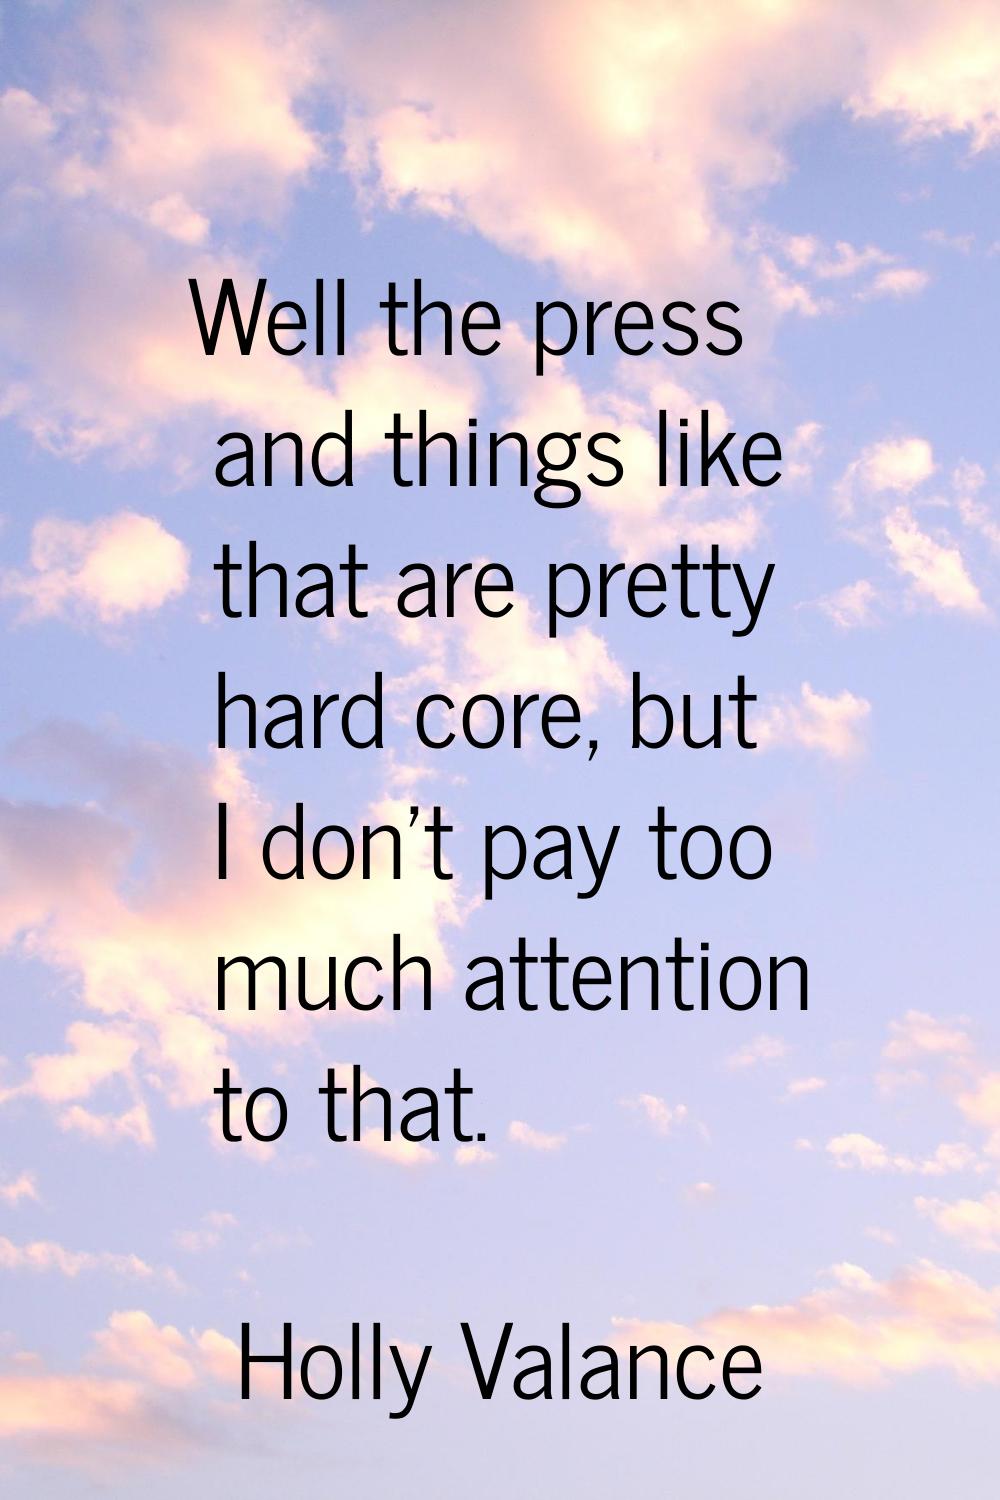 Well the press and things like that are pretty hard core, but I don't pay too much attention to tha